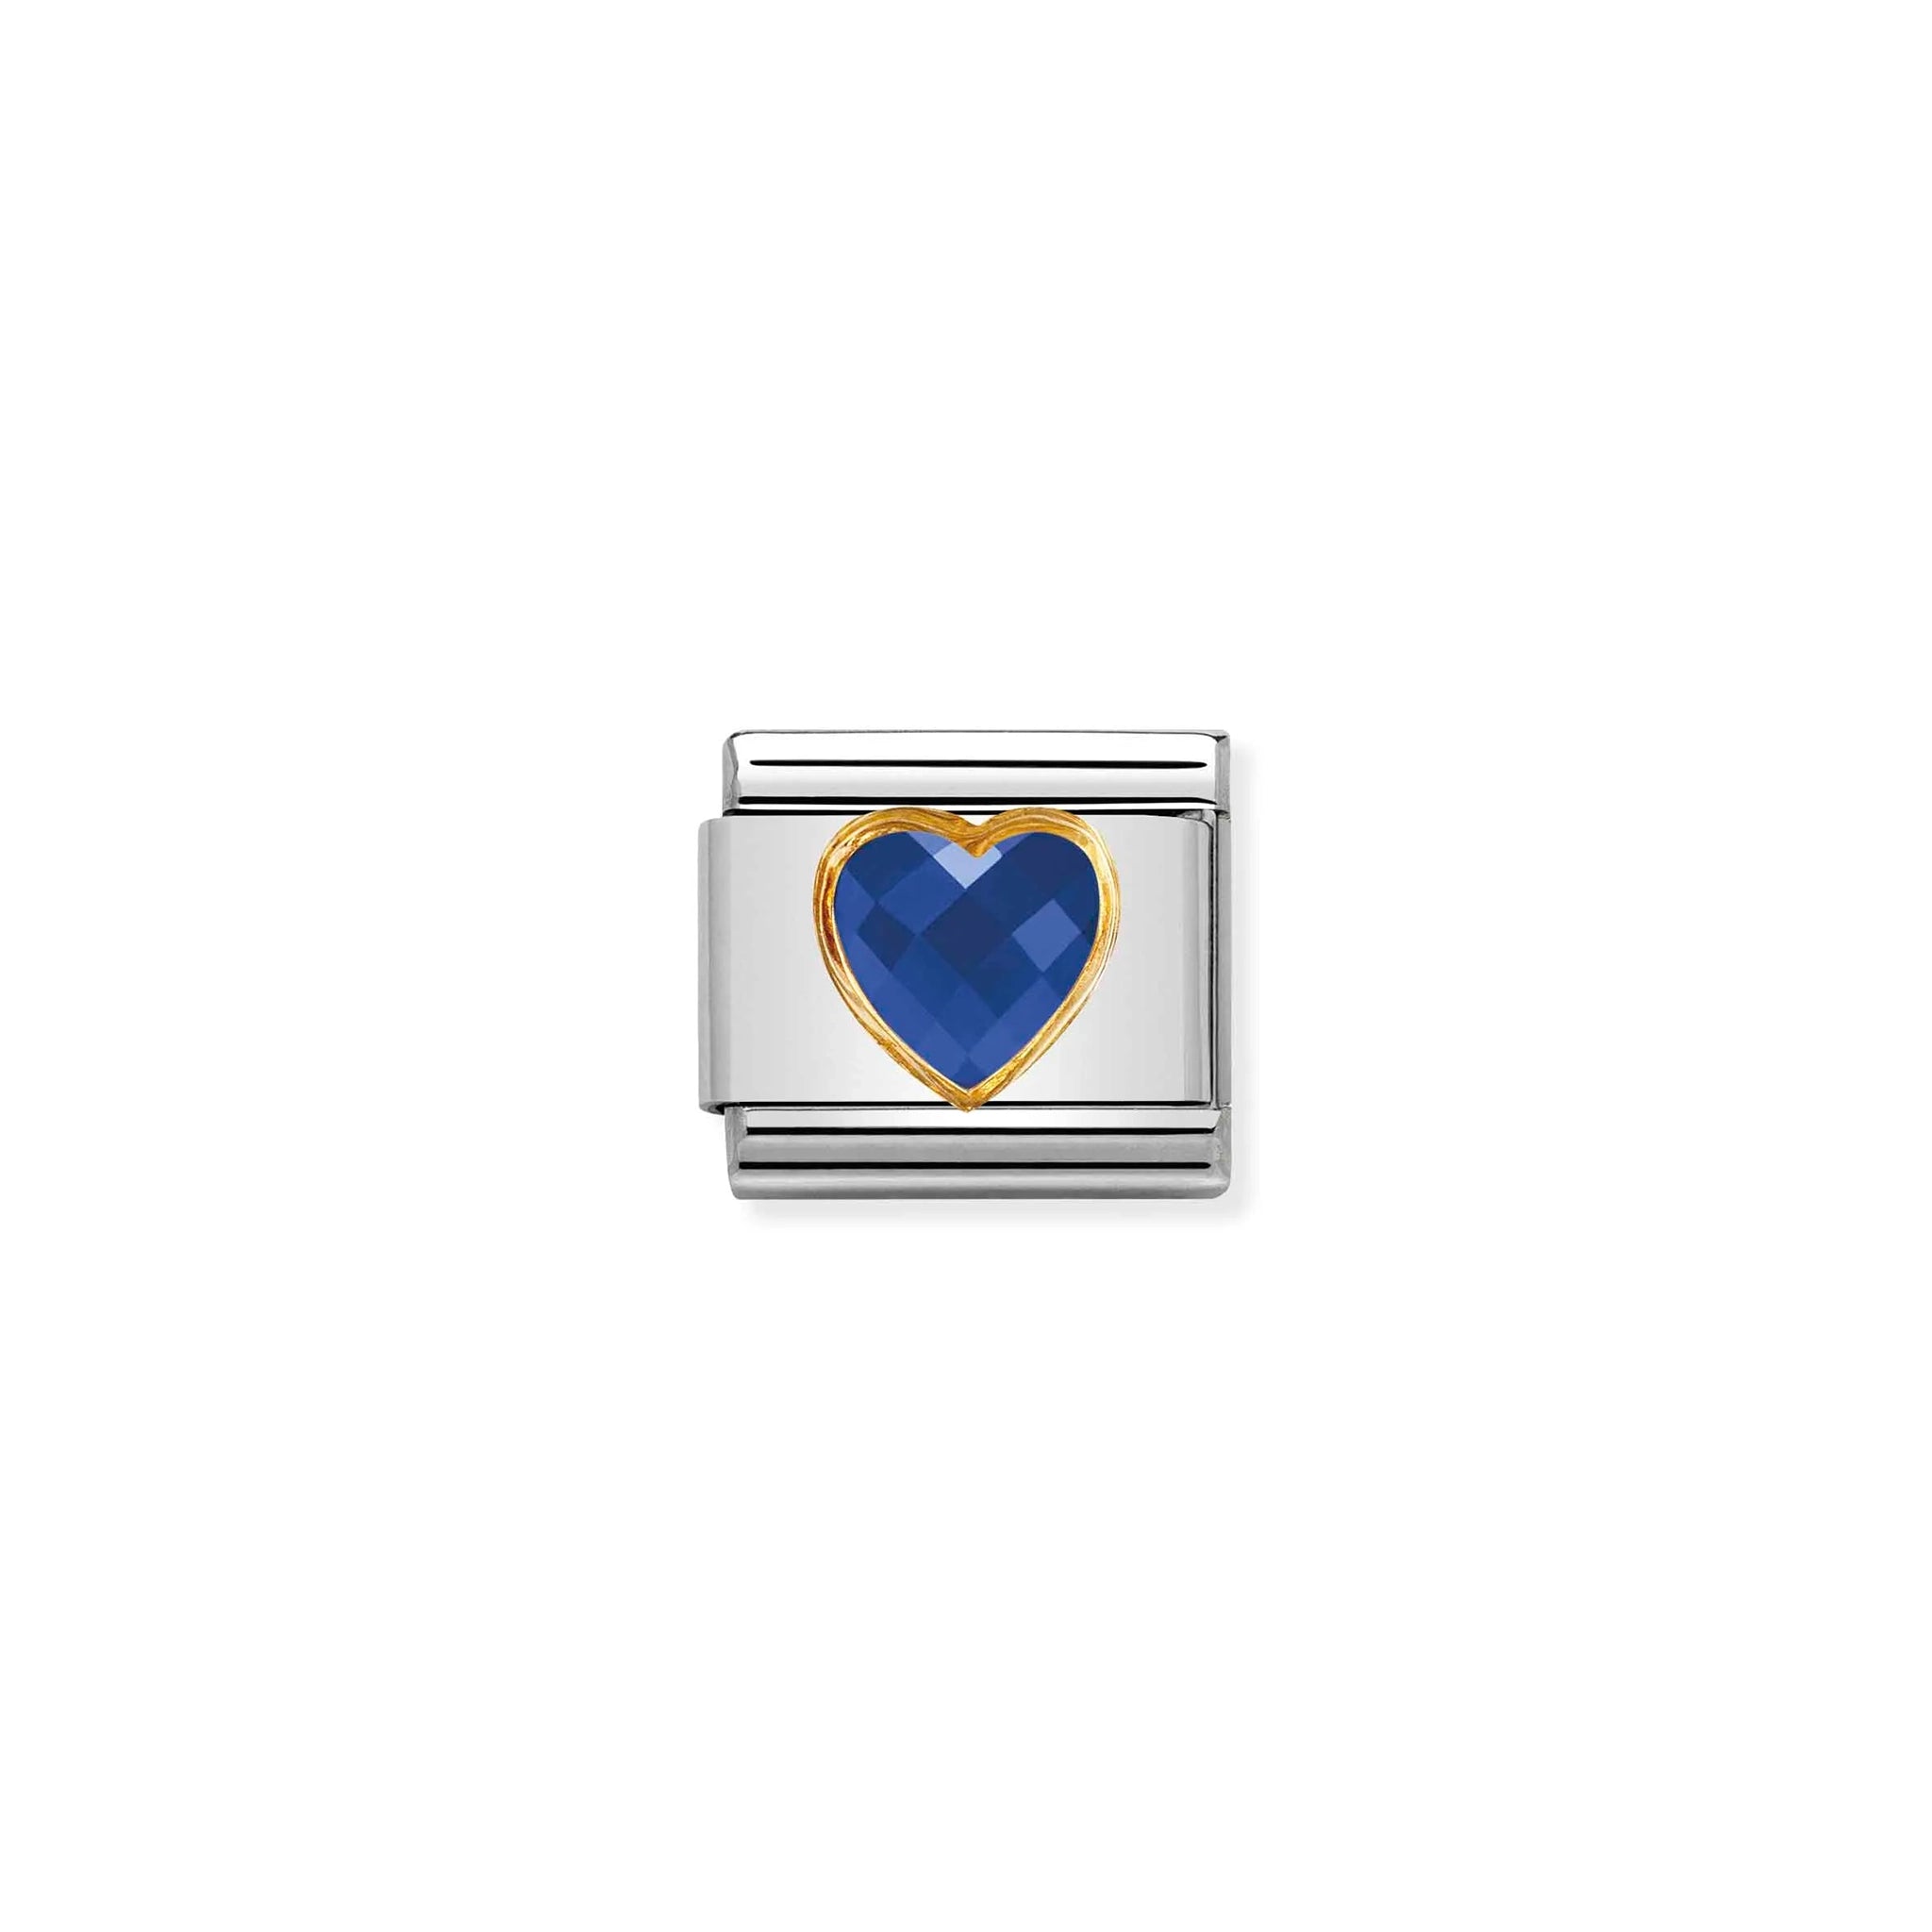 A Nomination charm link featuring a heart shaped blue cubic zirconia with gold surround